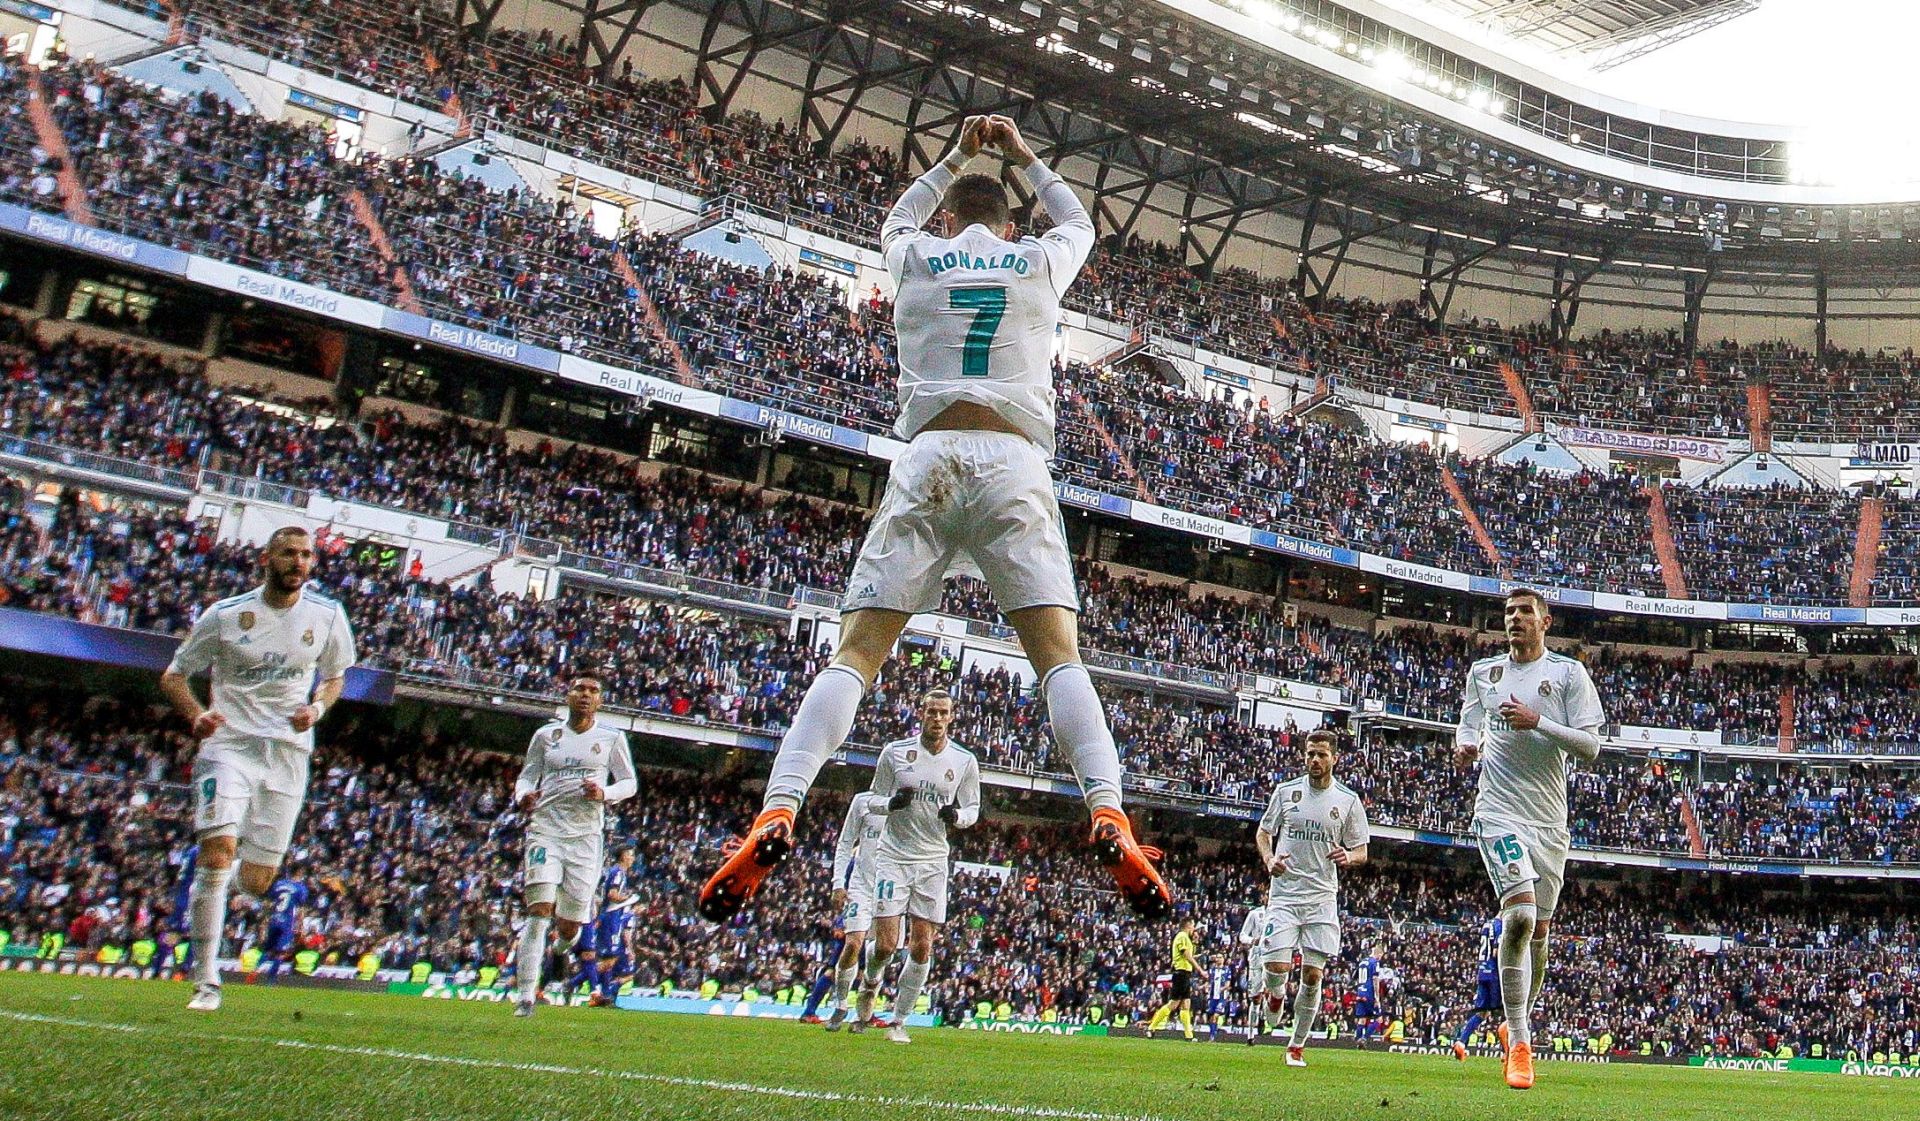 epa06561248 Real Madrid's Portuguese striker Cristiano Ronaldo (C) celebrates after scoring the 1-0 lead during the Spanish Primera Division soccer match between Real Madrid and Deportivo Alaves at Santiago Bernabeu stadium in Madrid, Spain, 24 February 2018.  EPA/JUANJO MARTIN